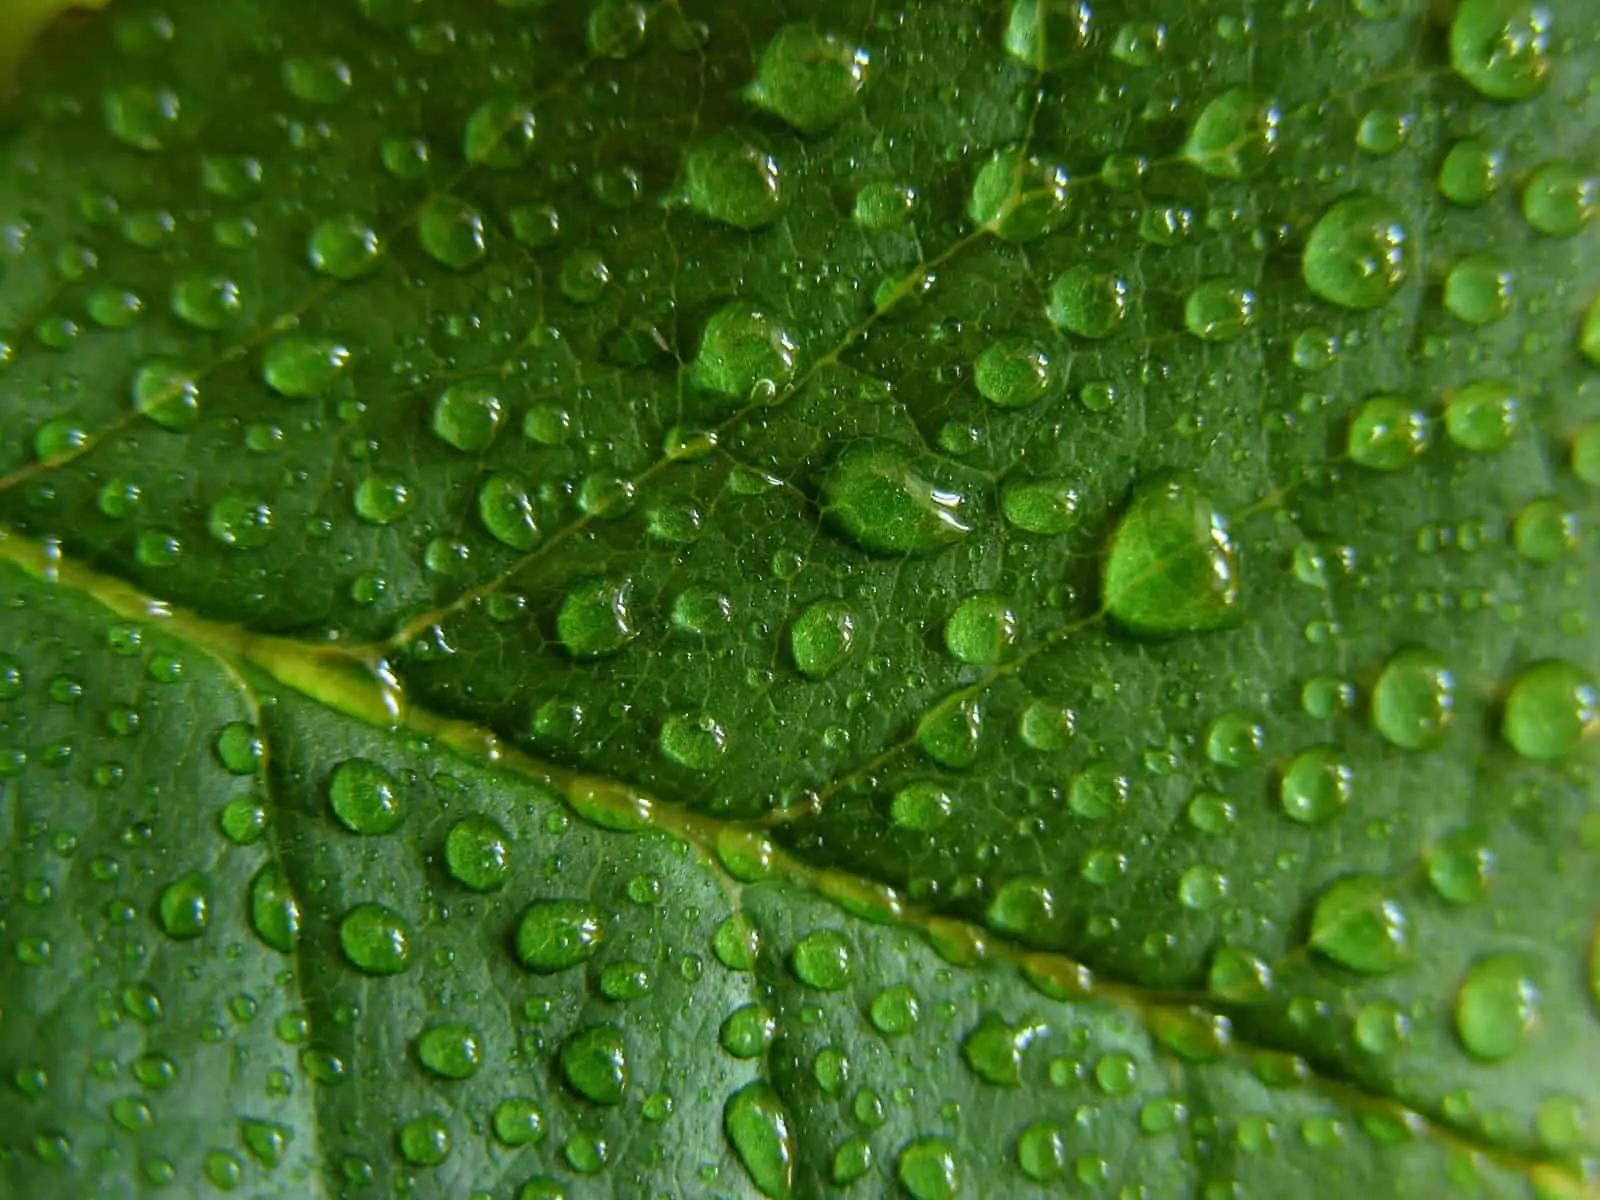 Controlling Humidity in Your Indoor Marijuana Grow. Water droplets on a leaf.